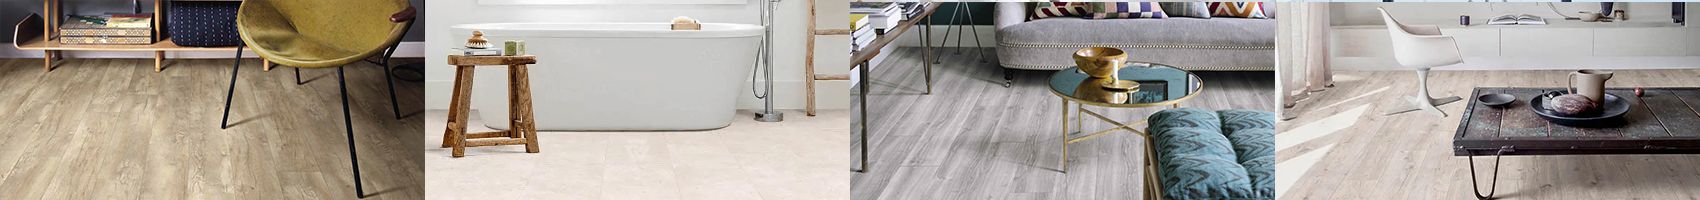 Clever Click Smoked Oak Flooring 191mm x 1320mm Pack of 7